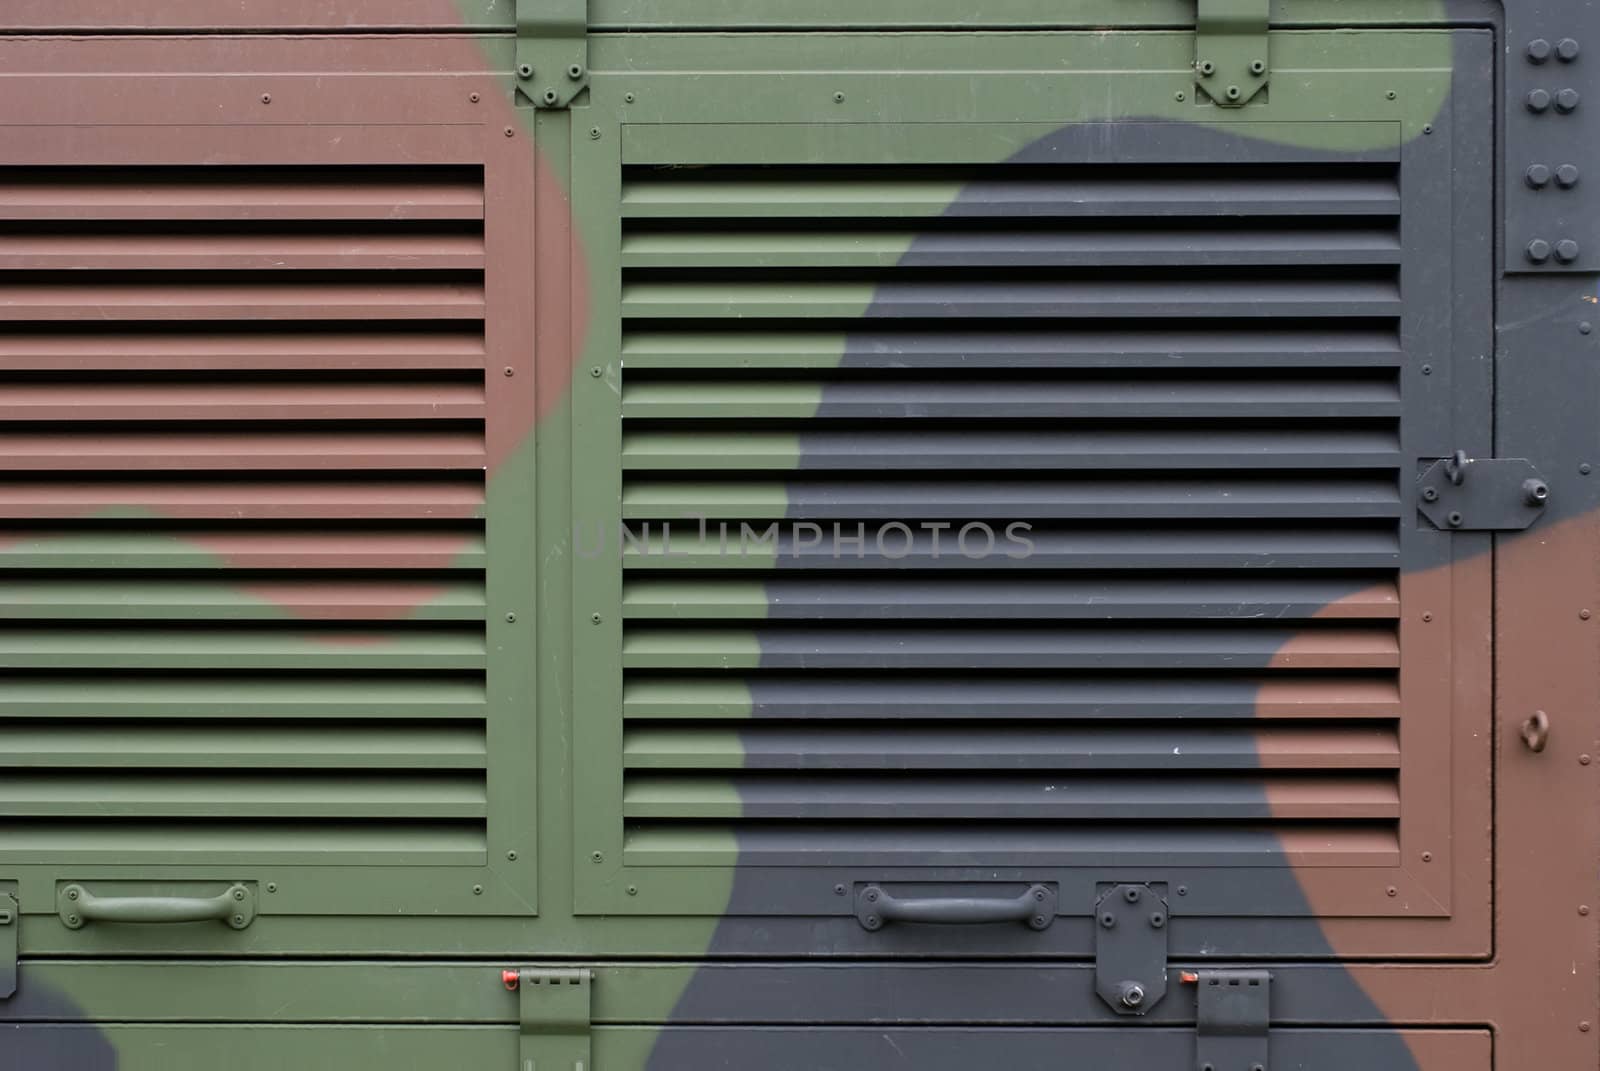 Ventilation grille on camouflaged aluminum army shelter